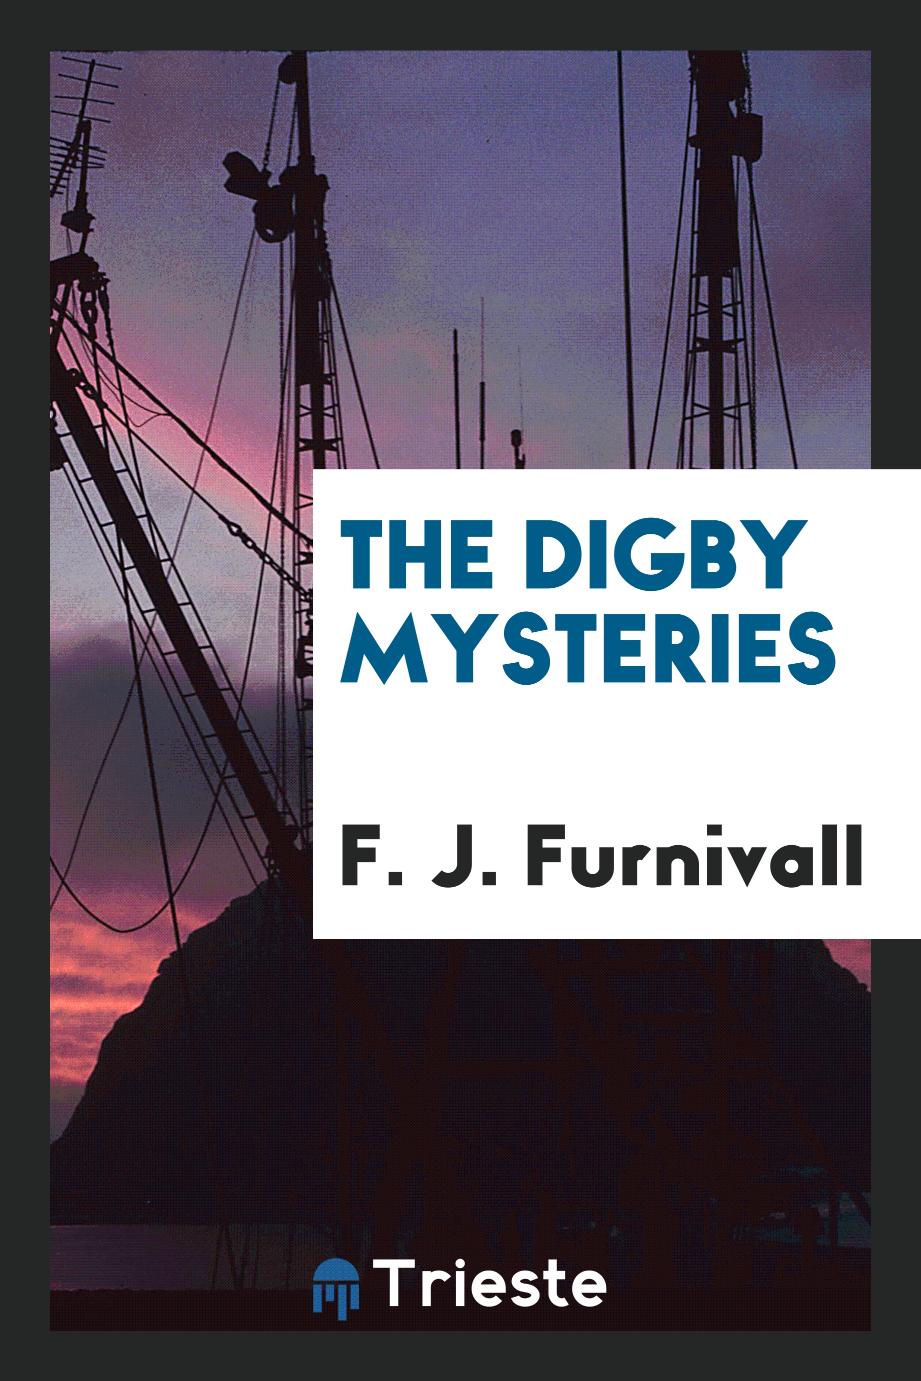 The Digby mysteries